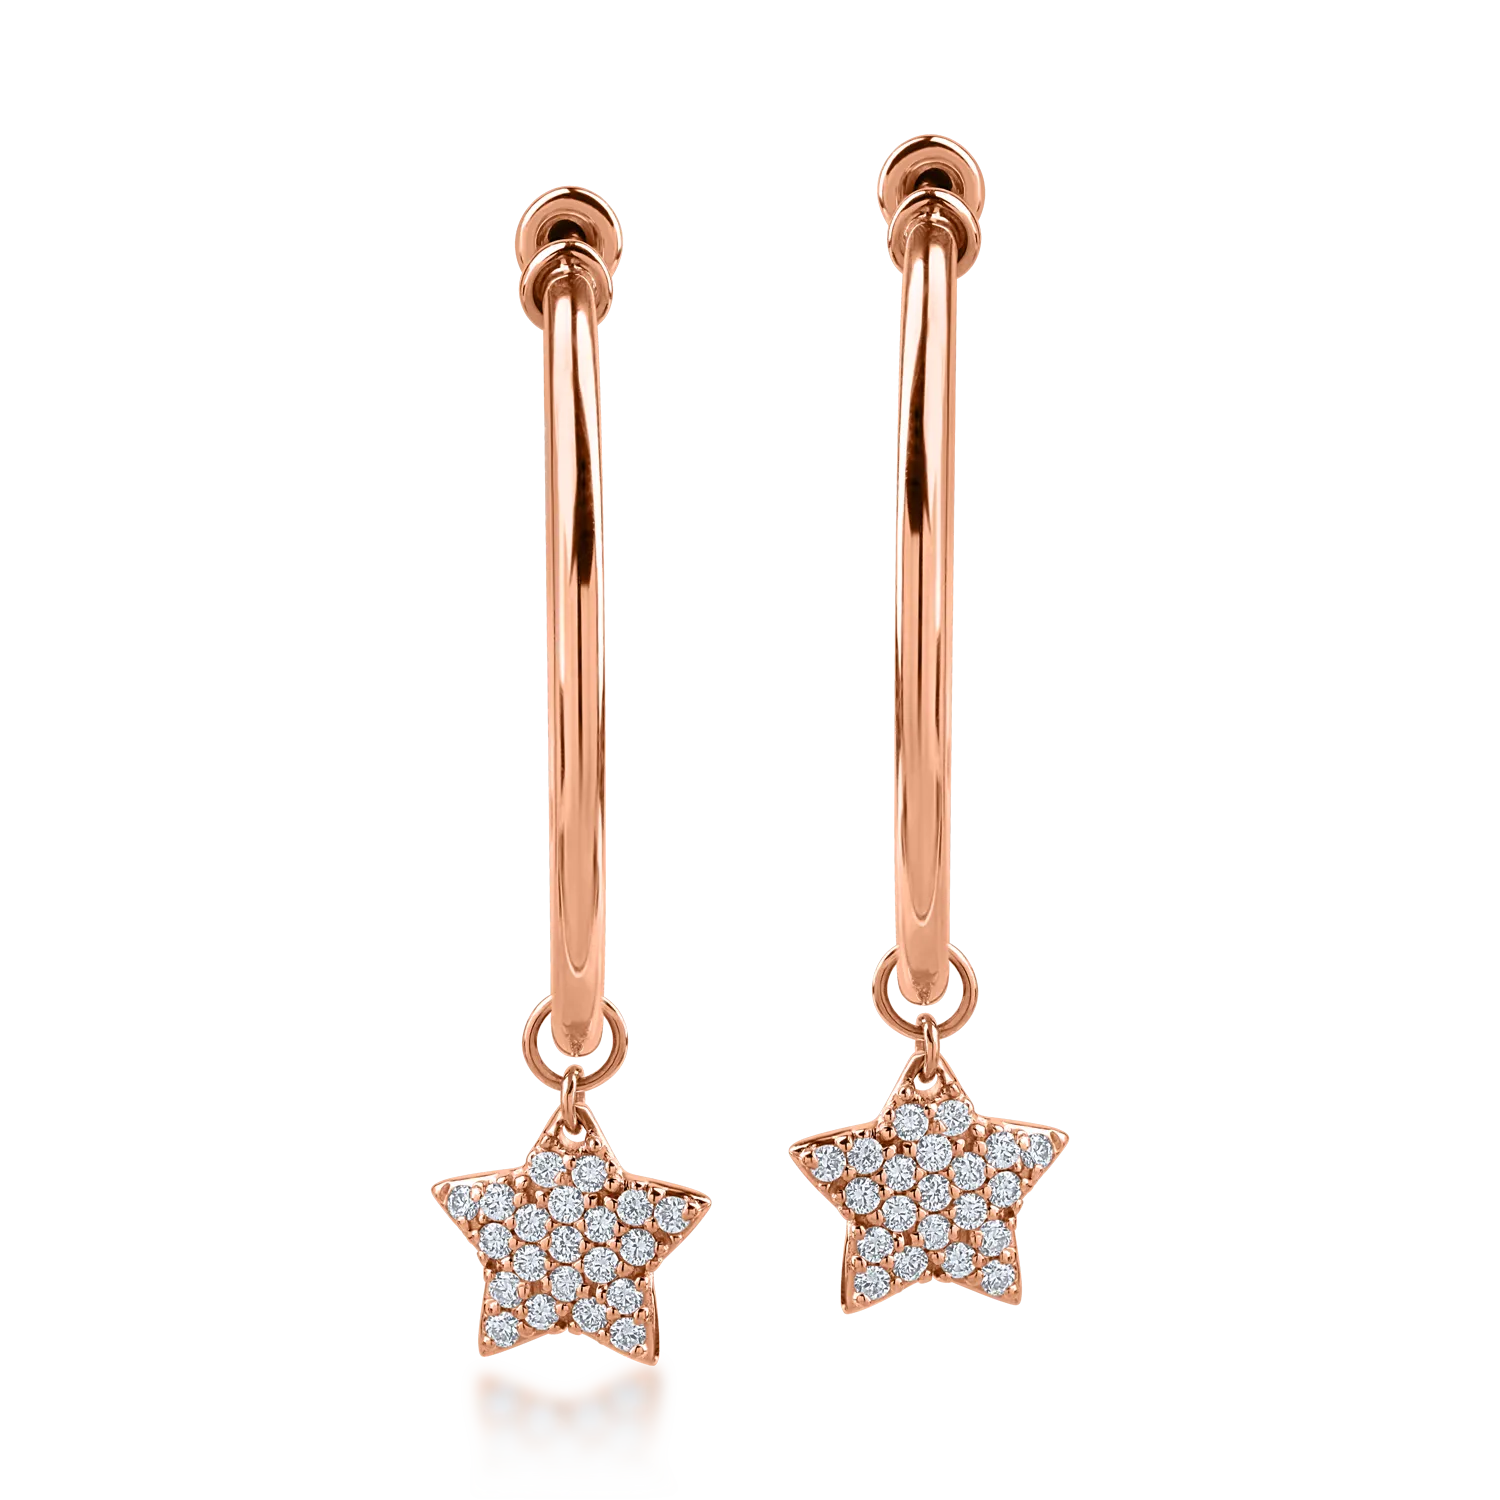 Rose gold earrings with 0.36ct diamonds